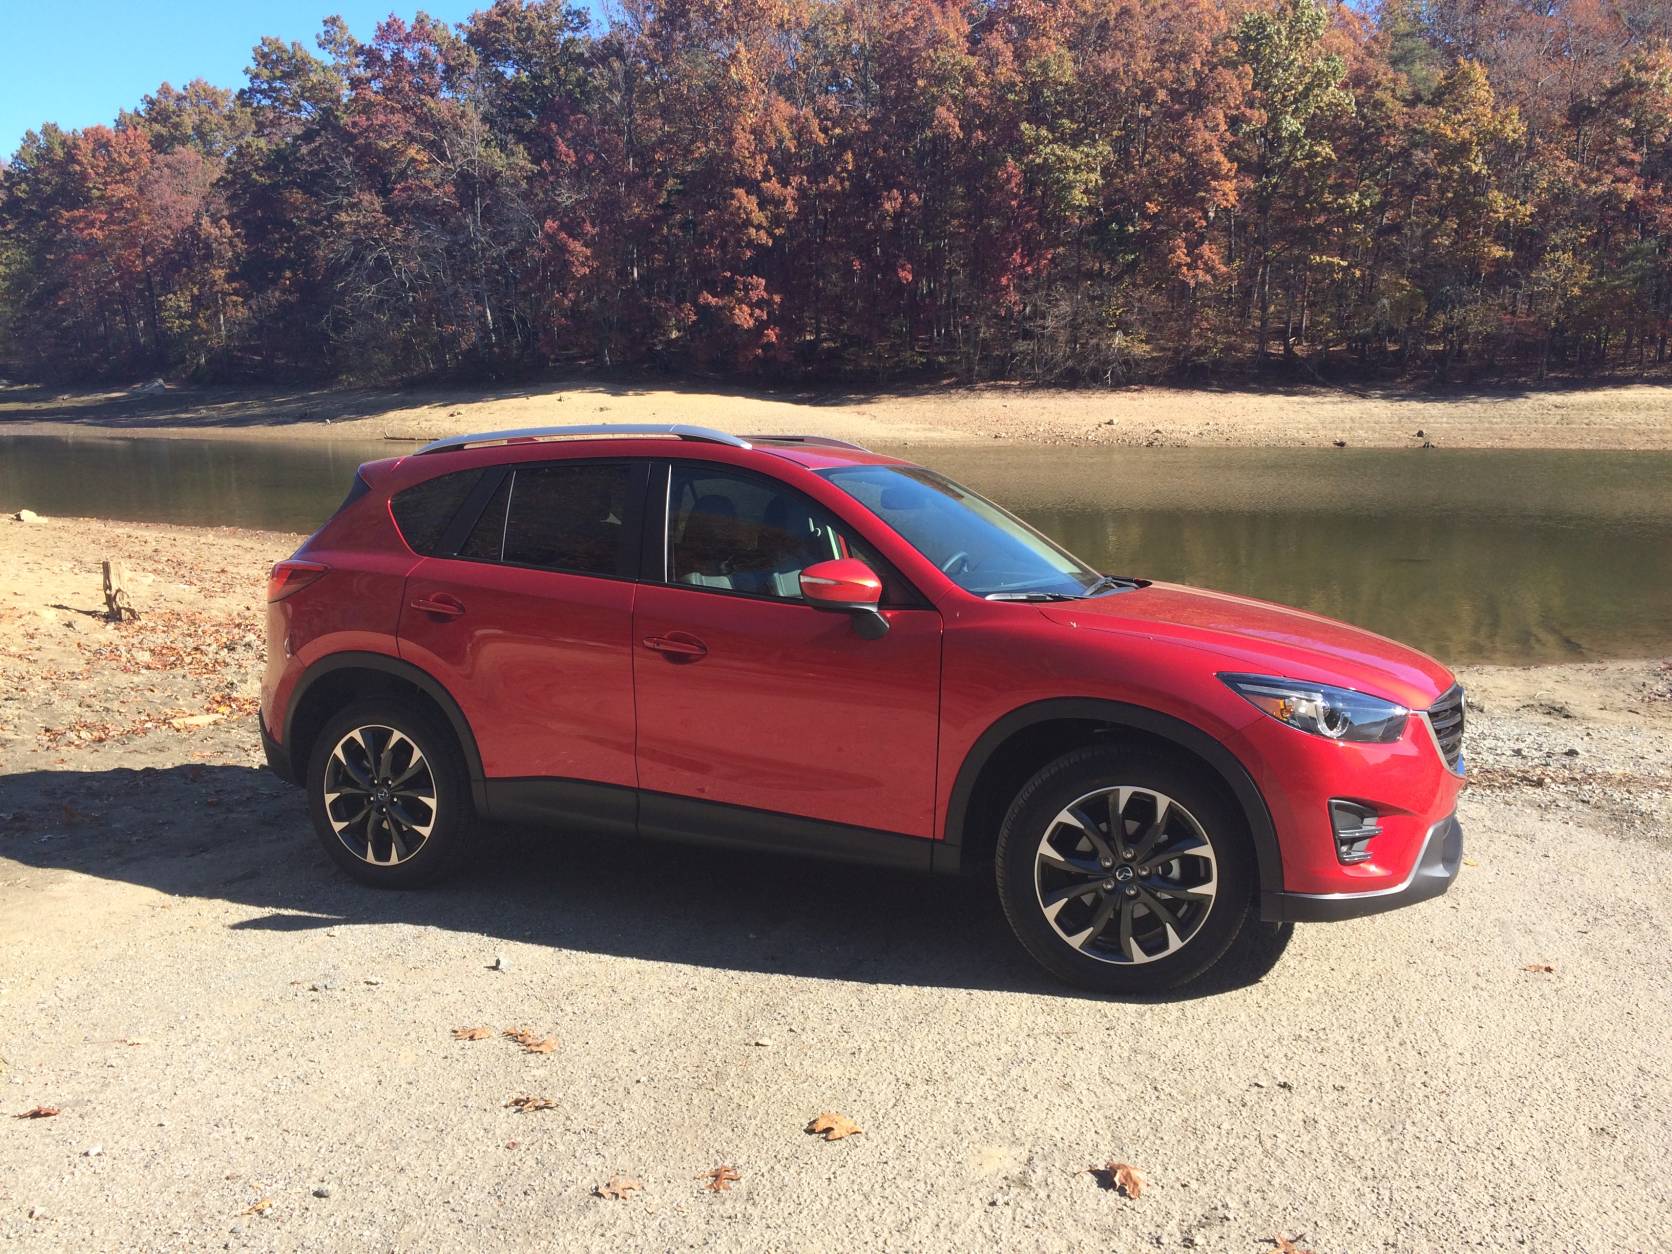 Mazda thinks that they can offer an AWD crossover that’s good for all weather conditions and still provide a fun-to-drive vehicle without breaking the bank. (WTOP/Mike Parris)